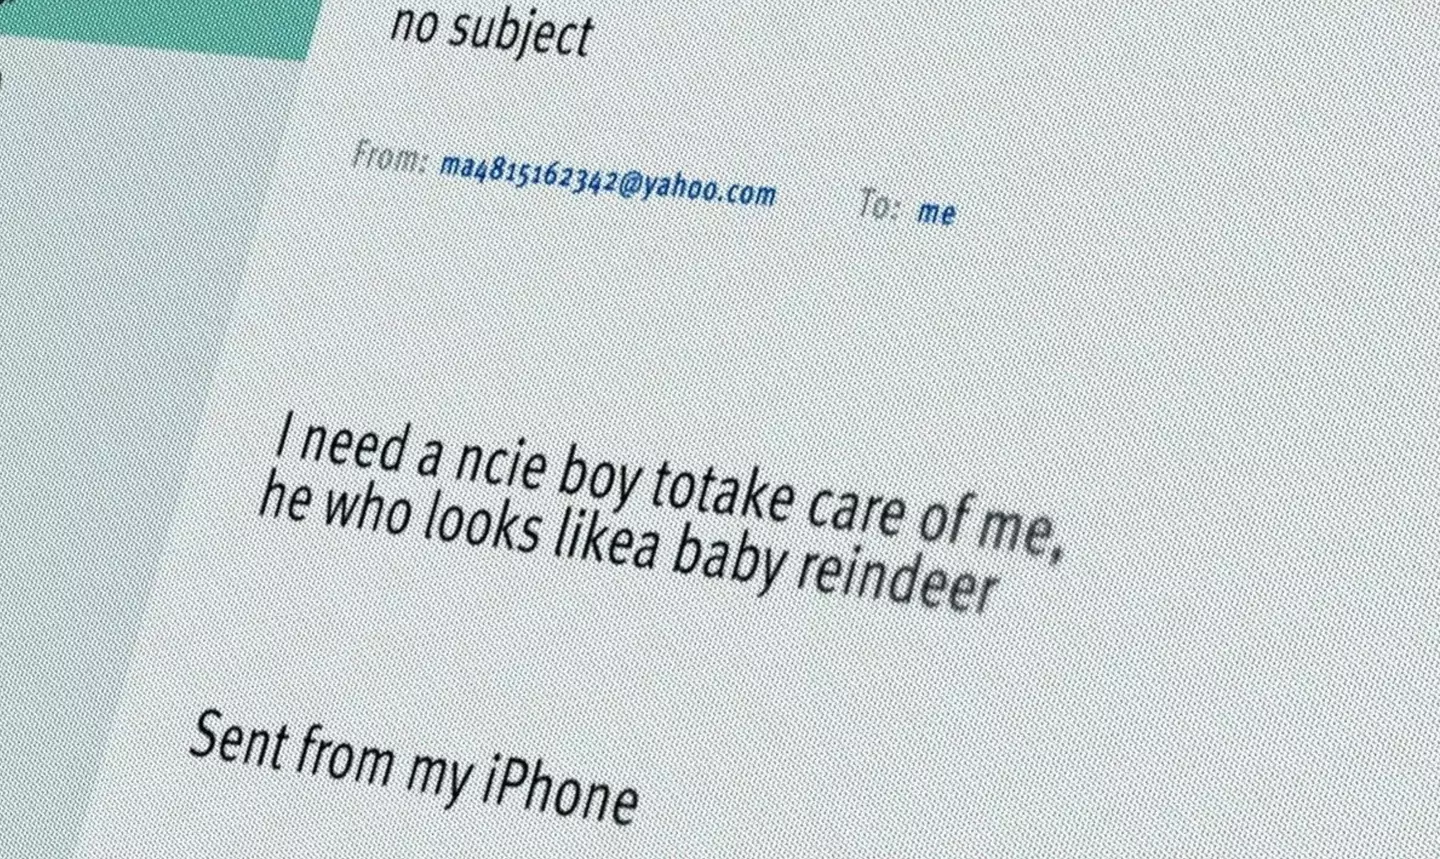 Baby Reindeer's Martha obsessively used the email sign-off despite not owning an iPhone (Netflix)